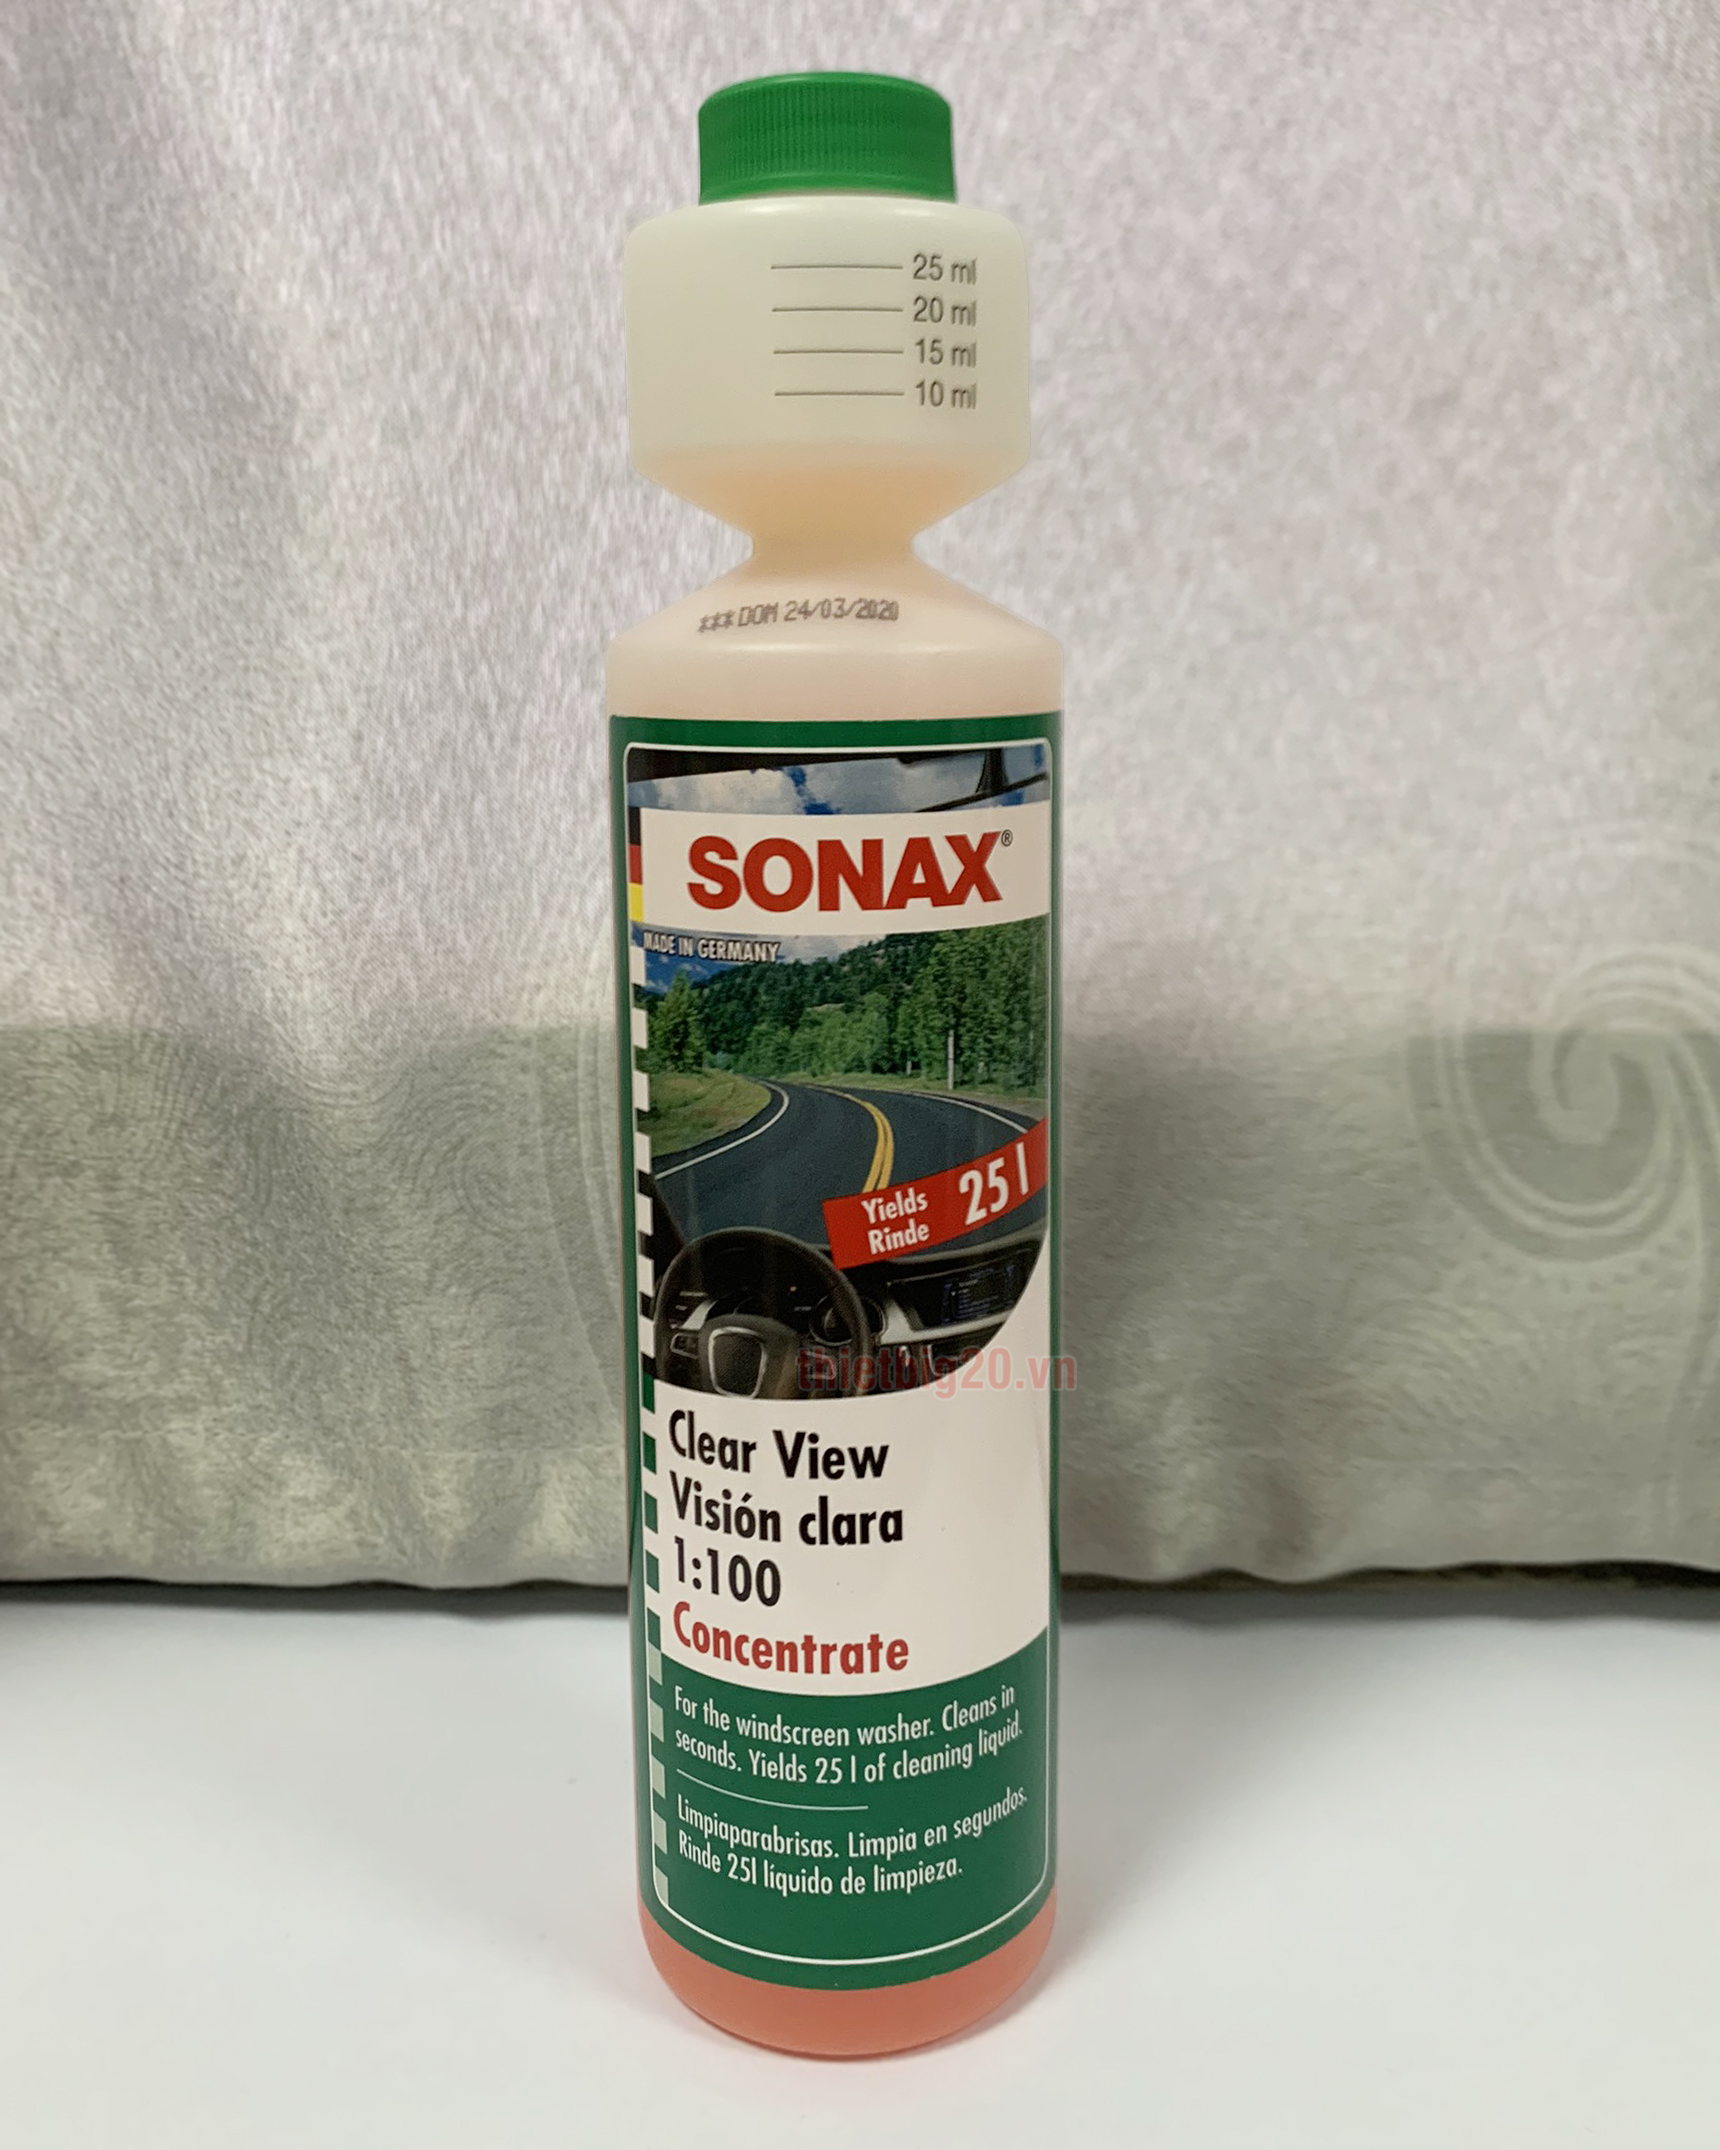 Sonax ClearView 1:100 Concentrate - 250ml 